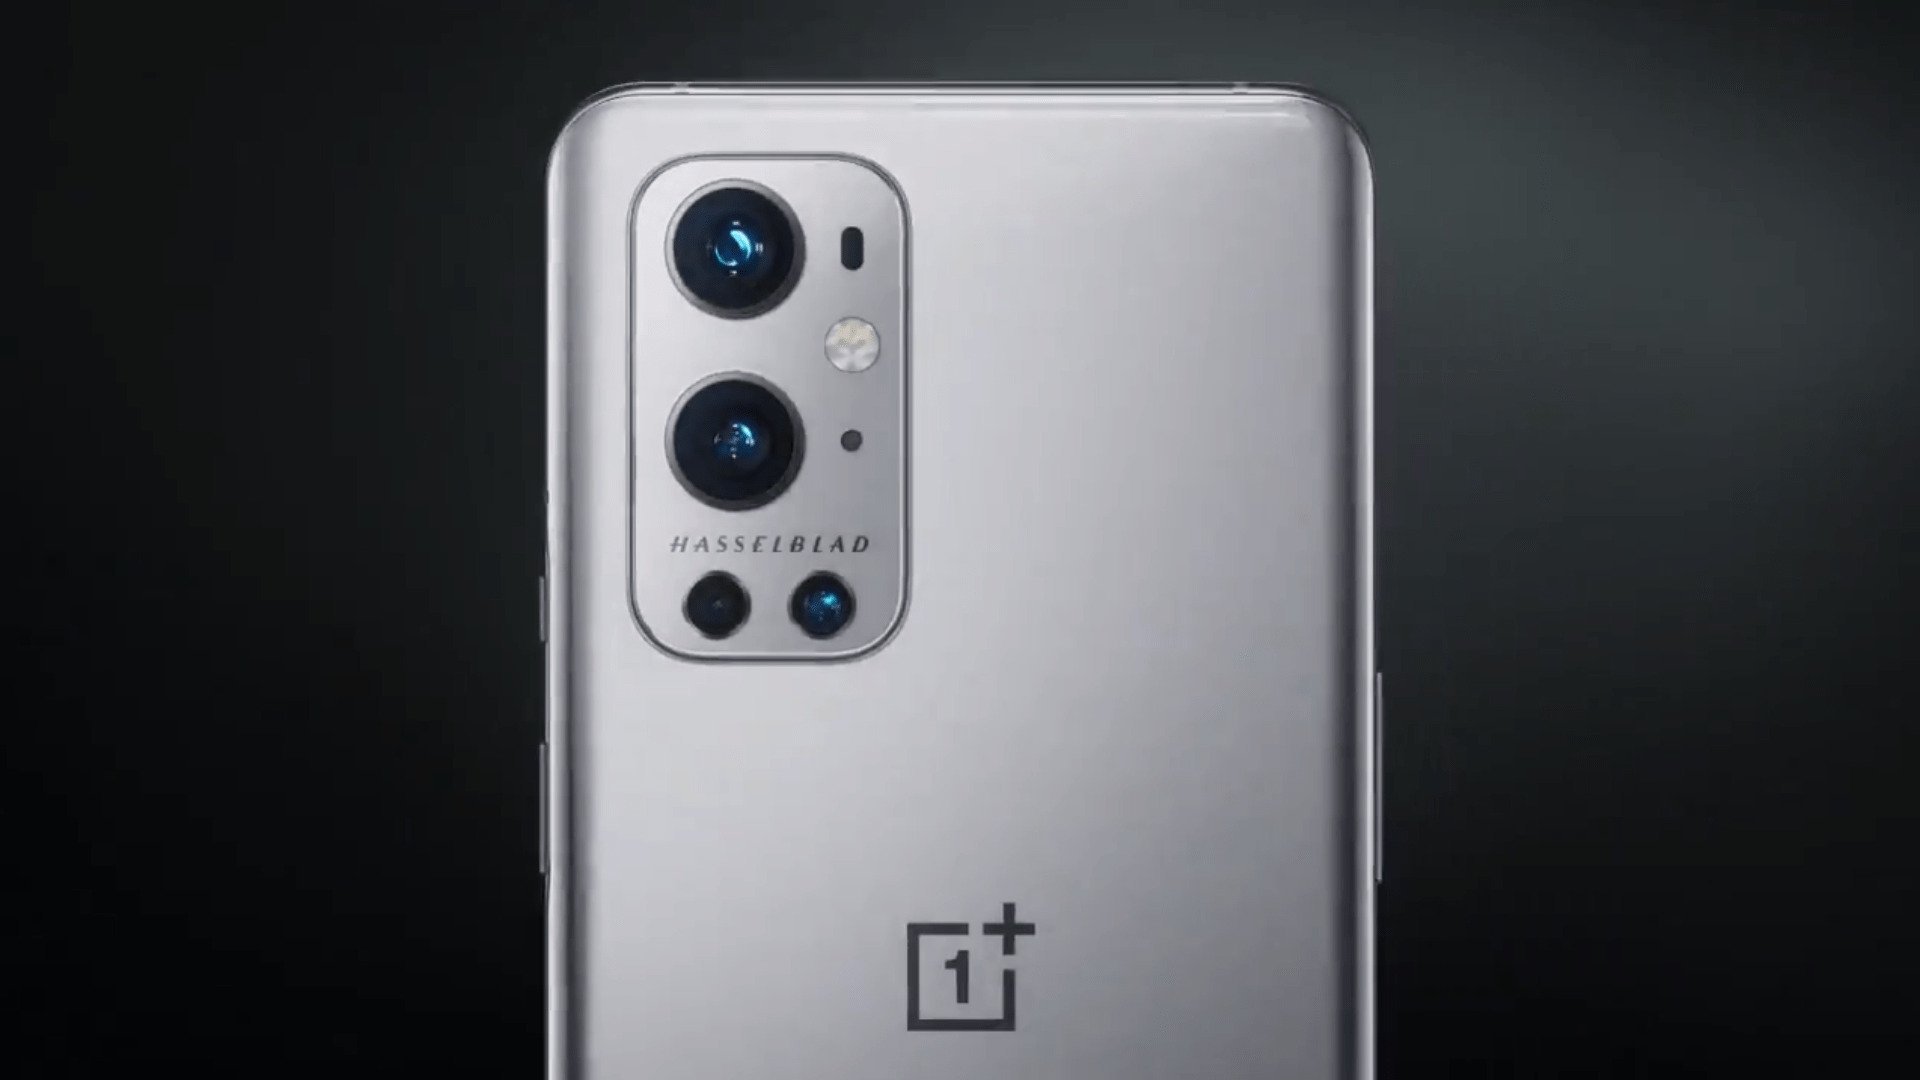 OnePlus enters partnership with camera maker Hasselblad